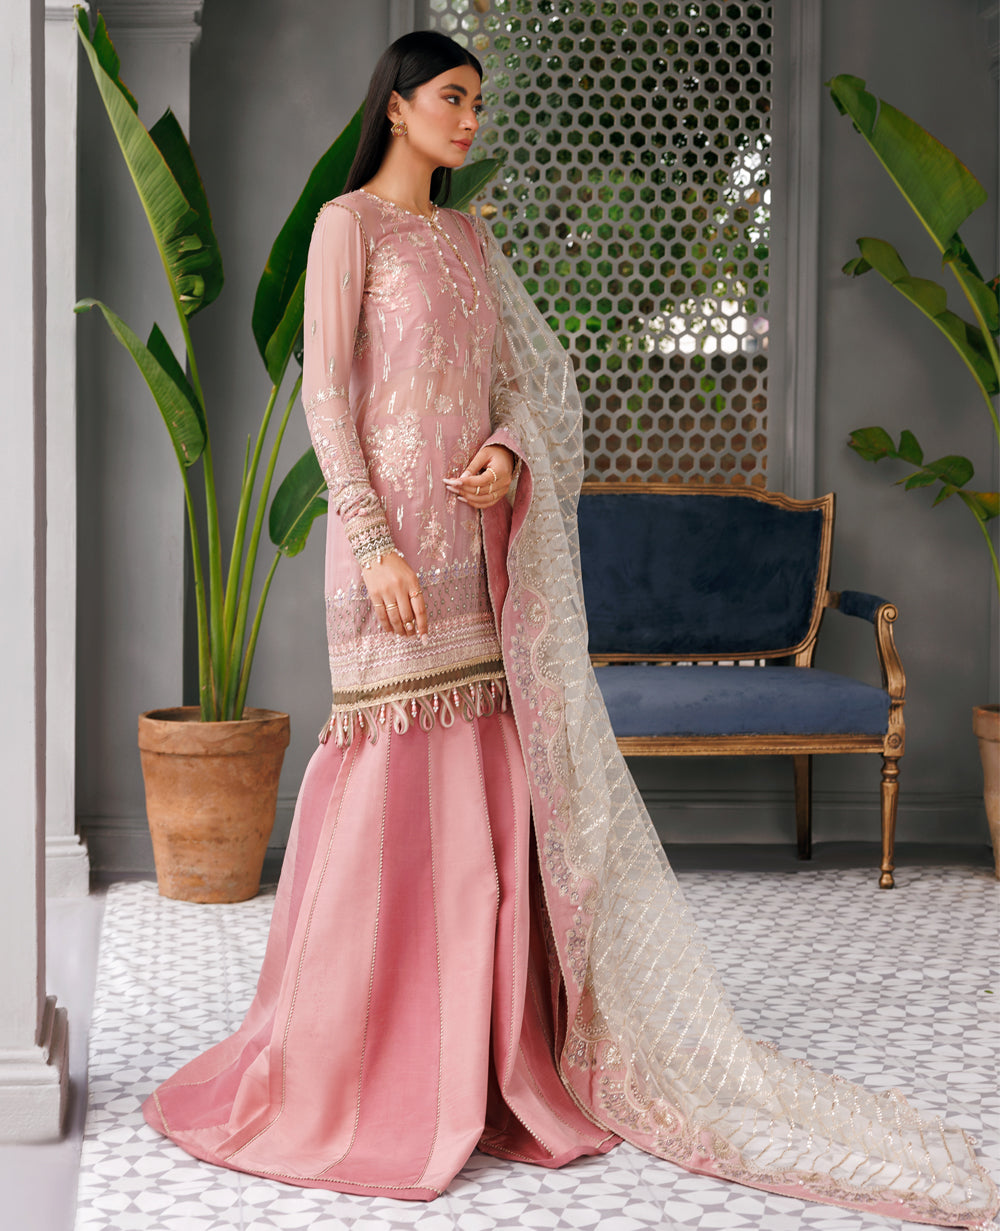 XENIA Formals Hera Luxury Unstitched Chiffon 3Pc Suit - TAUPE